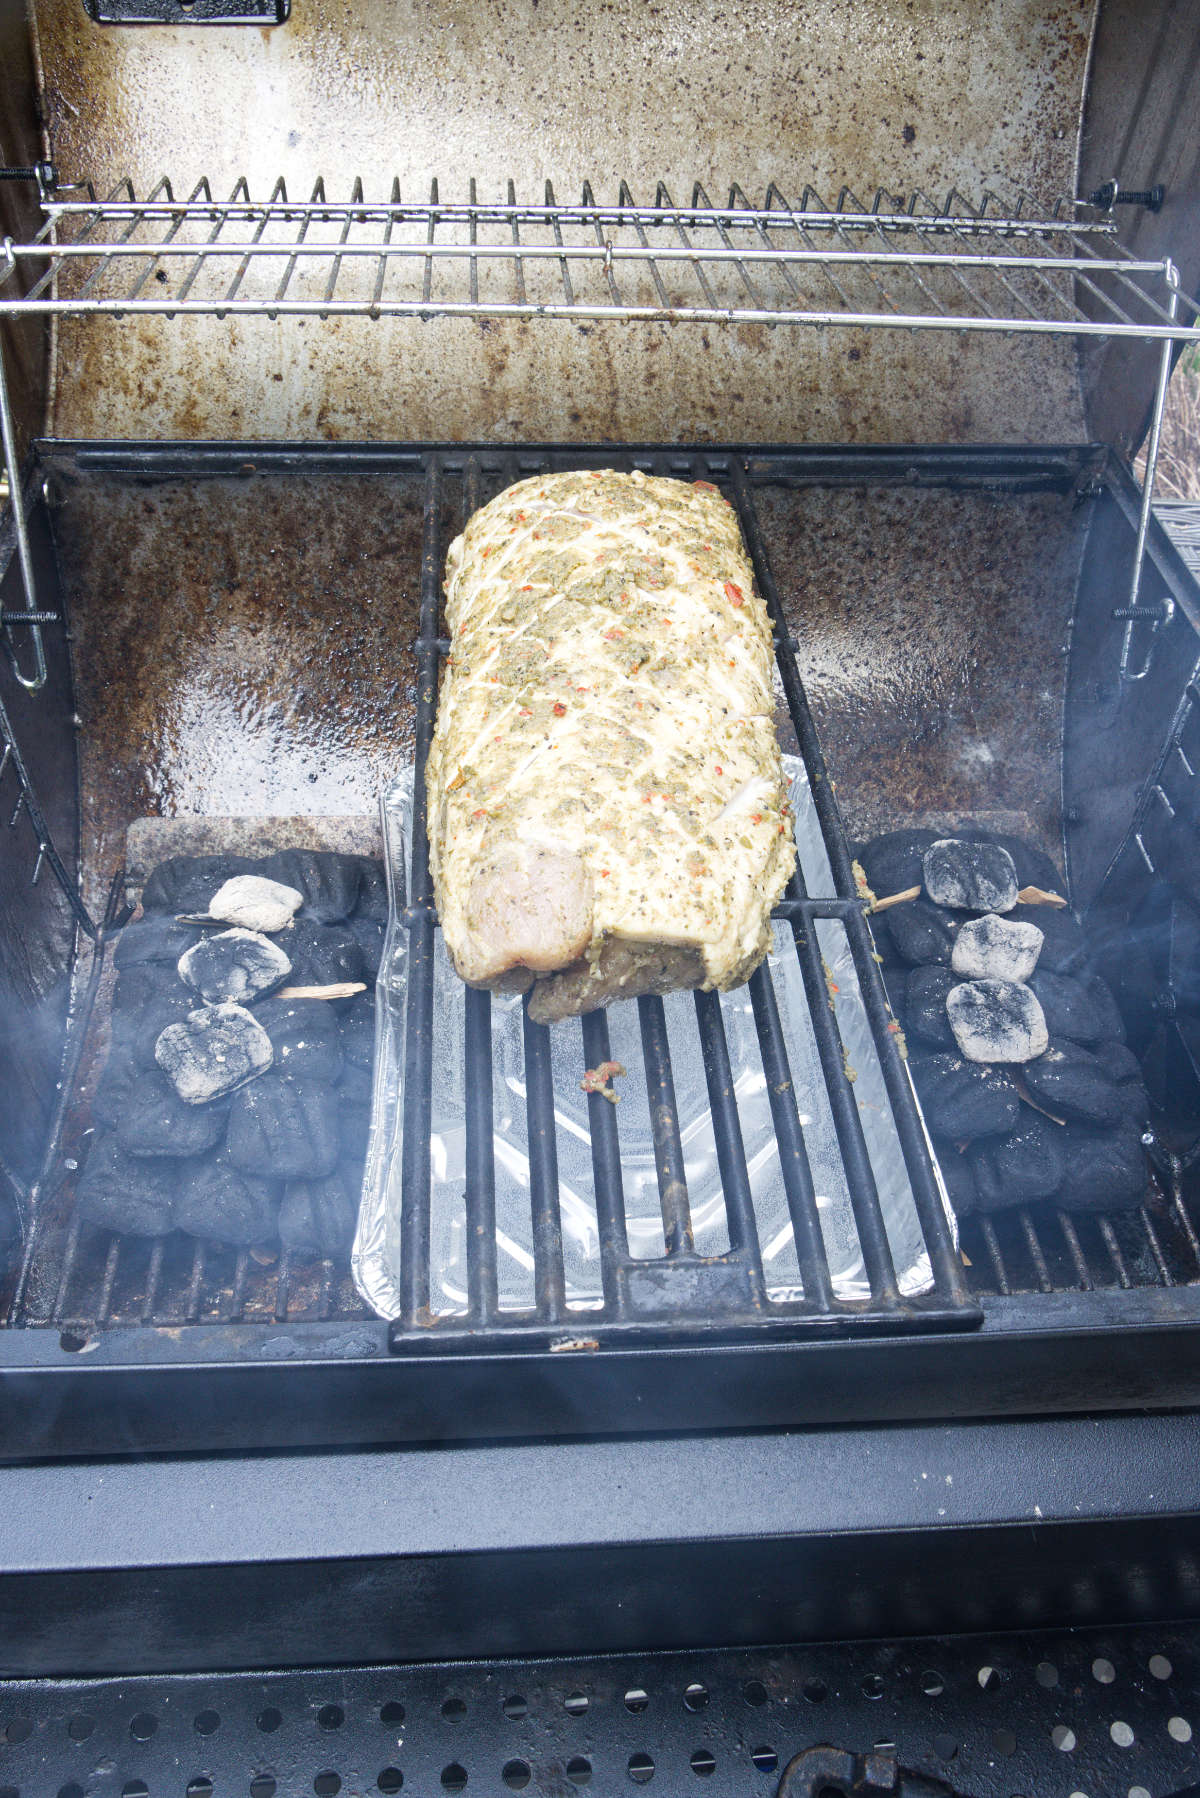 Pork loin smoking on the charcoal grill using the parallel or 2-zone method with a water pan.